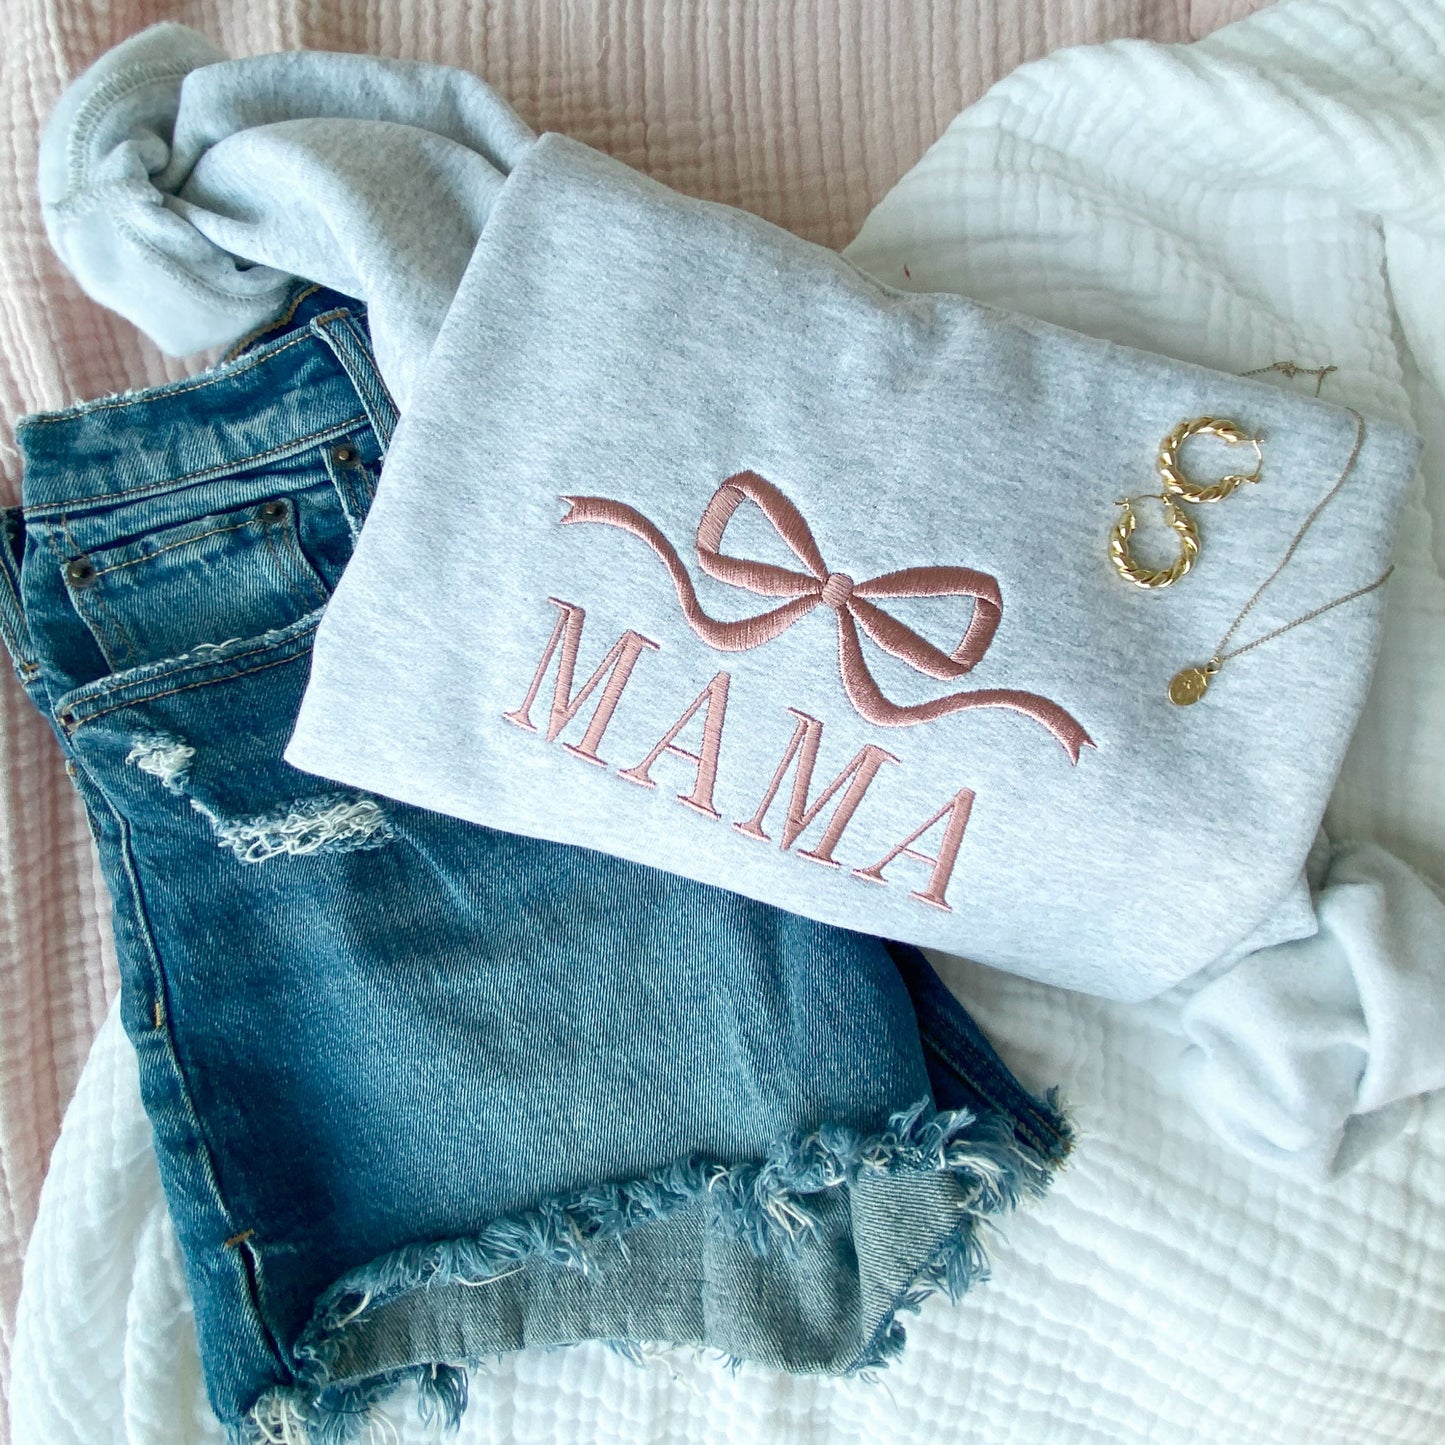 styled flat lay of an ash crewneck sweatshrt with jeans and jewelry. On the crewneck is embroidered Bow and mama design in mauve thread